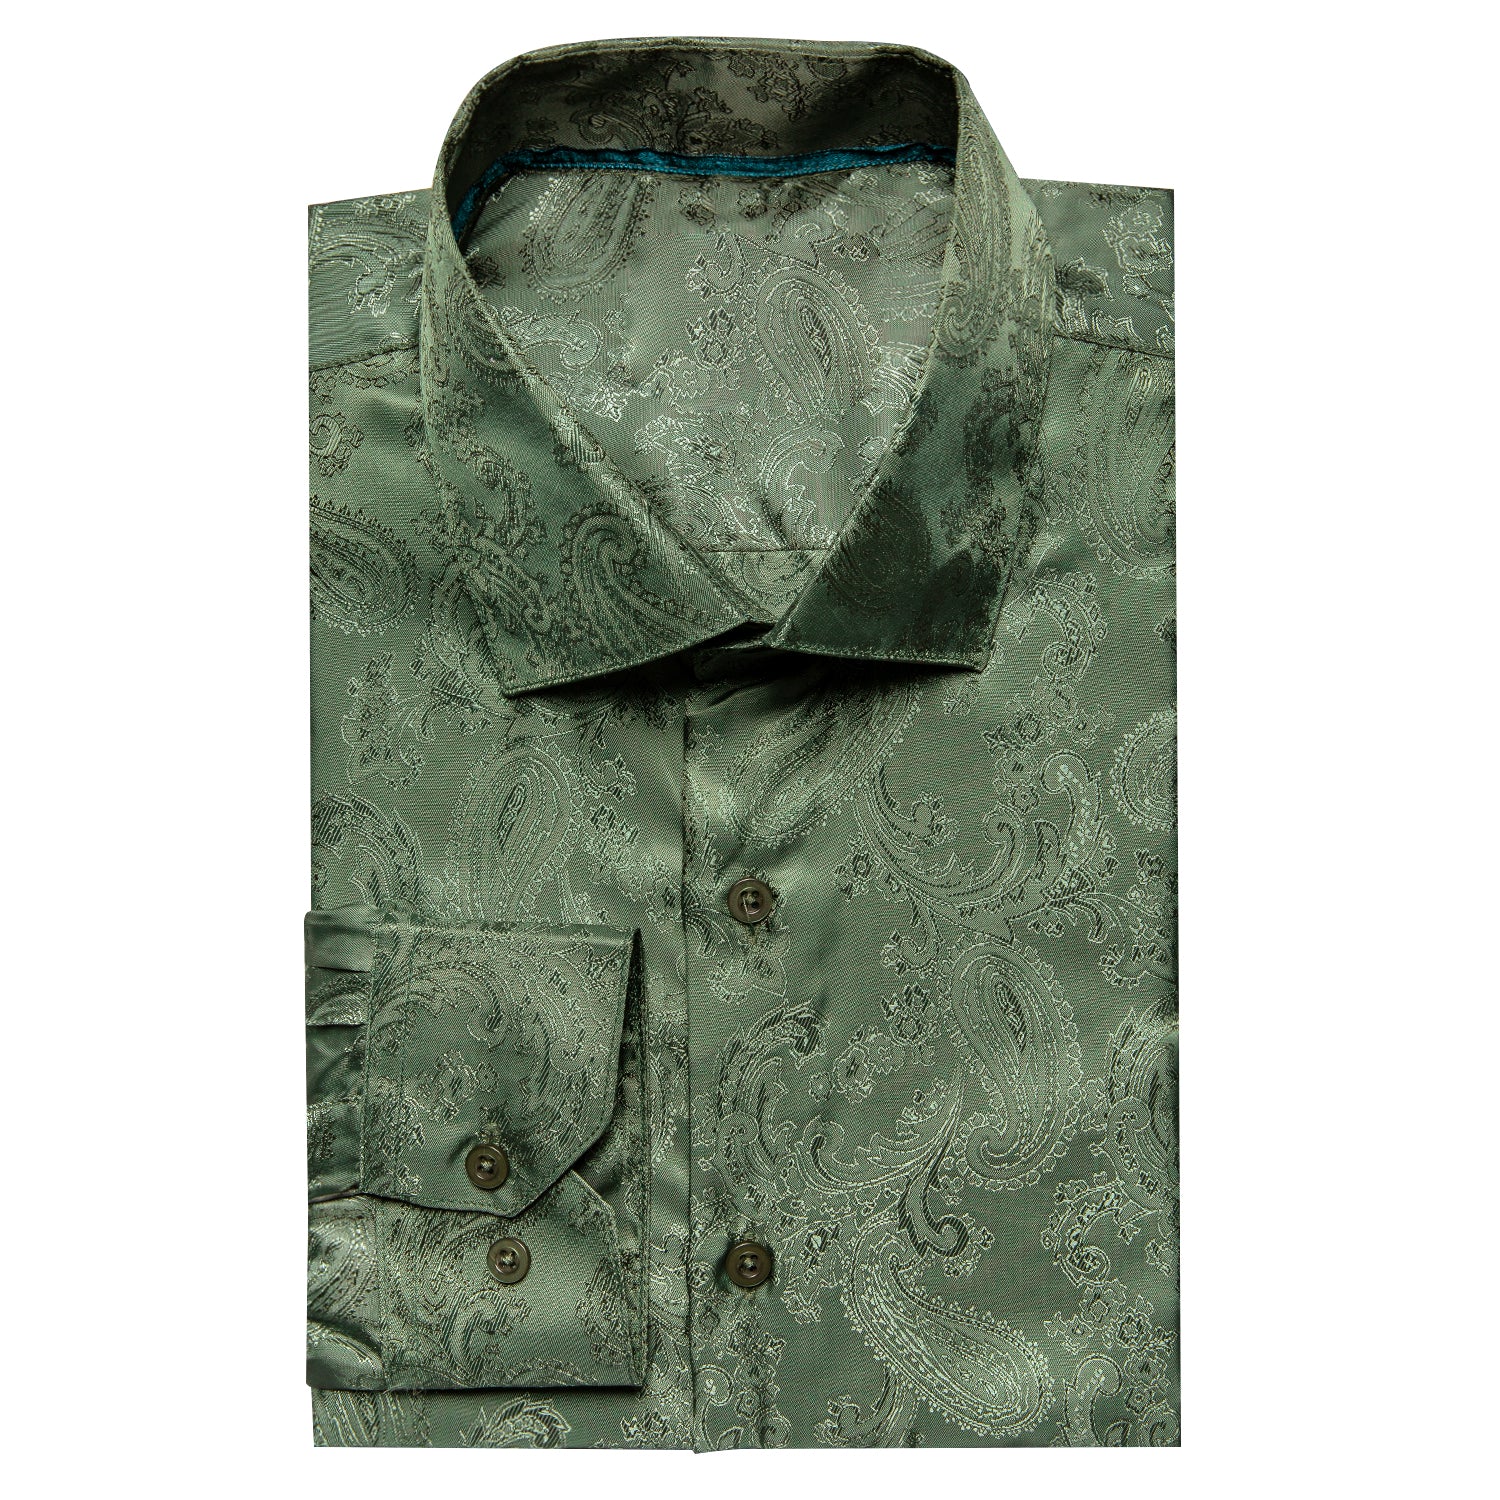 Clearance Sale New Olive Green Paisley Silk Men's Long Sleeve Shirt